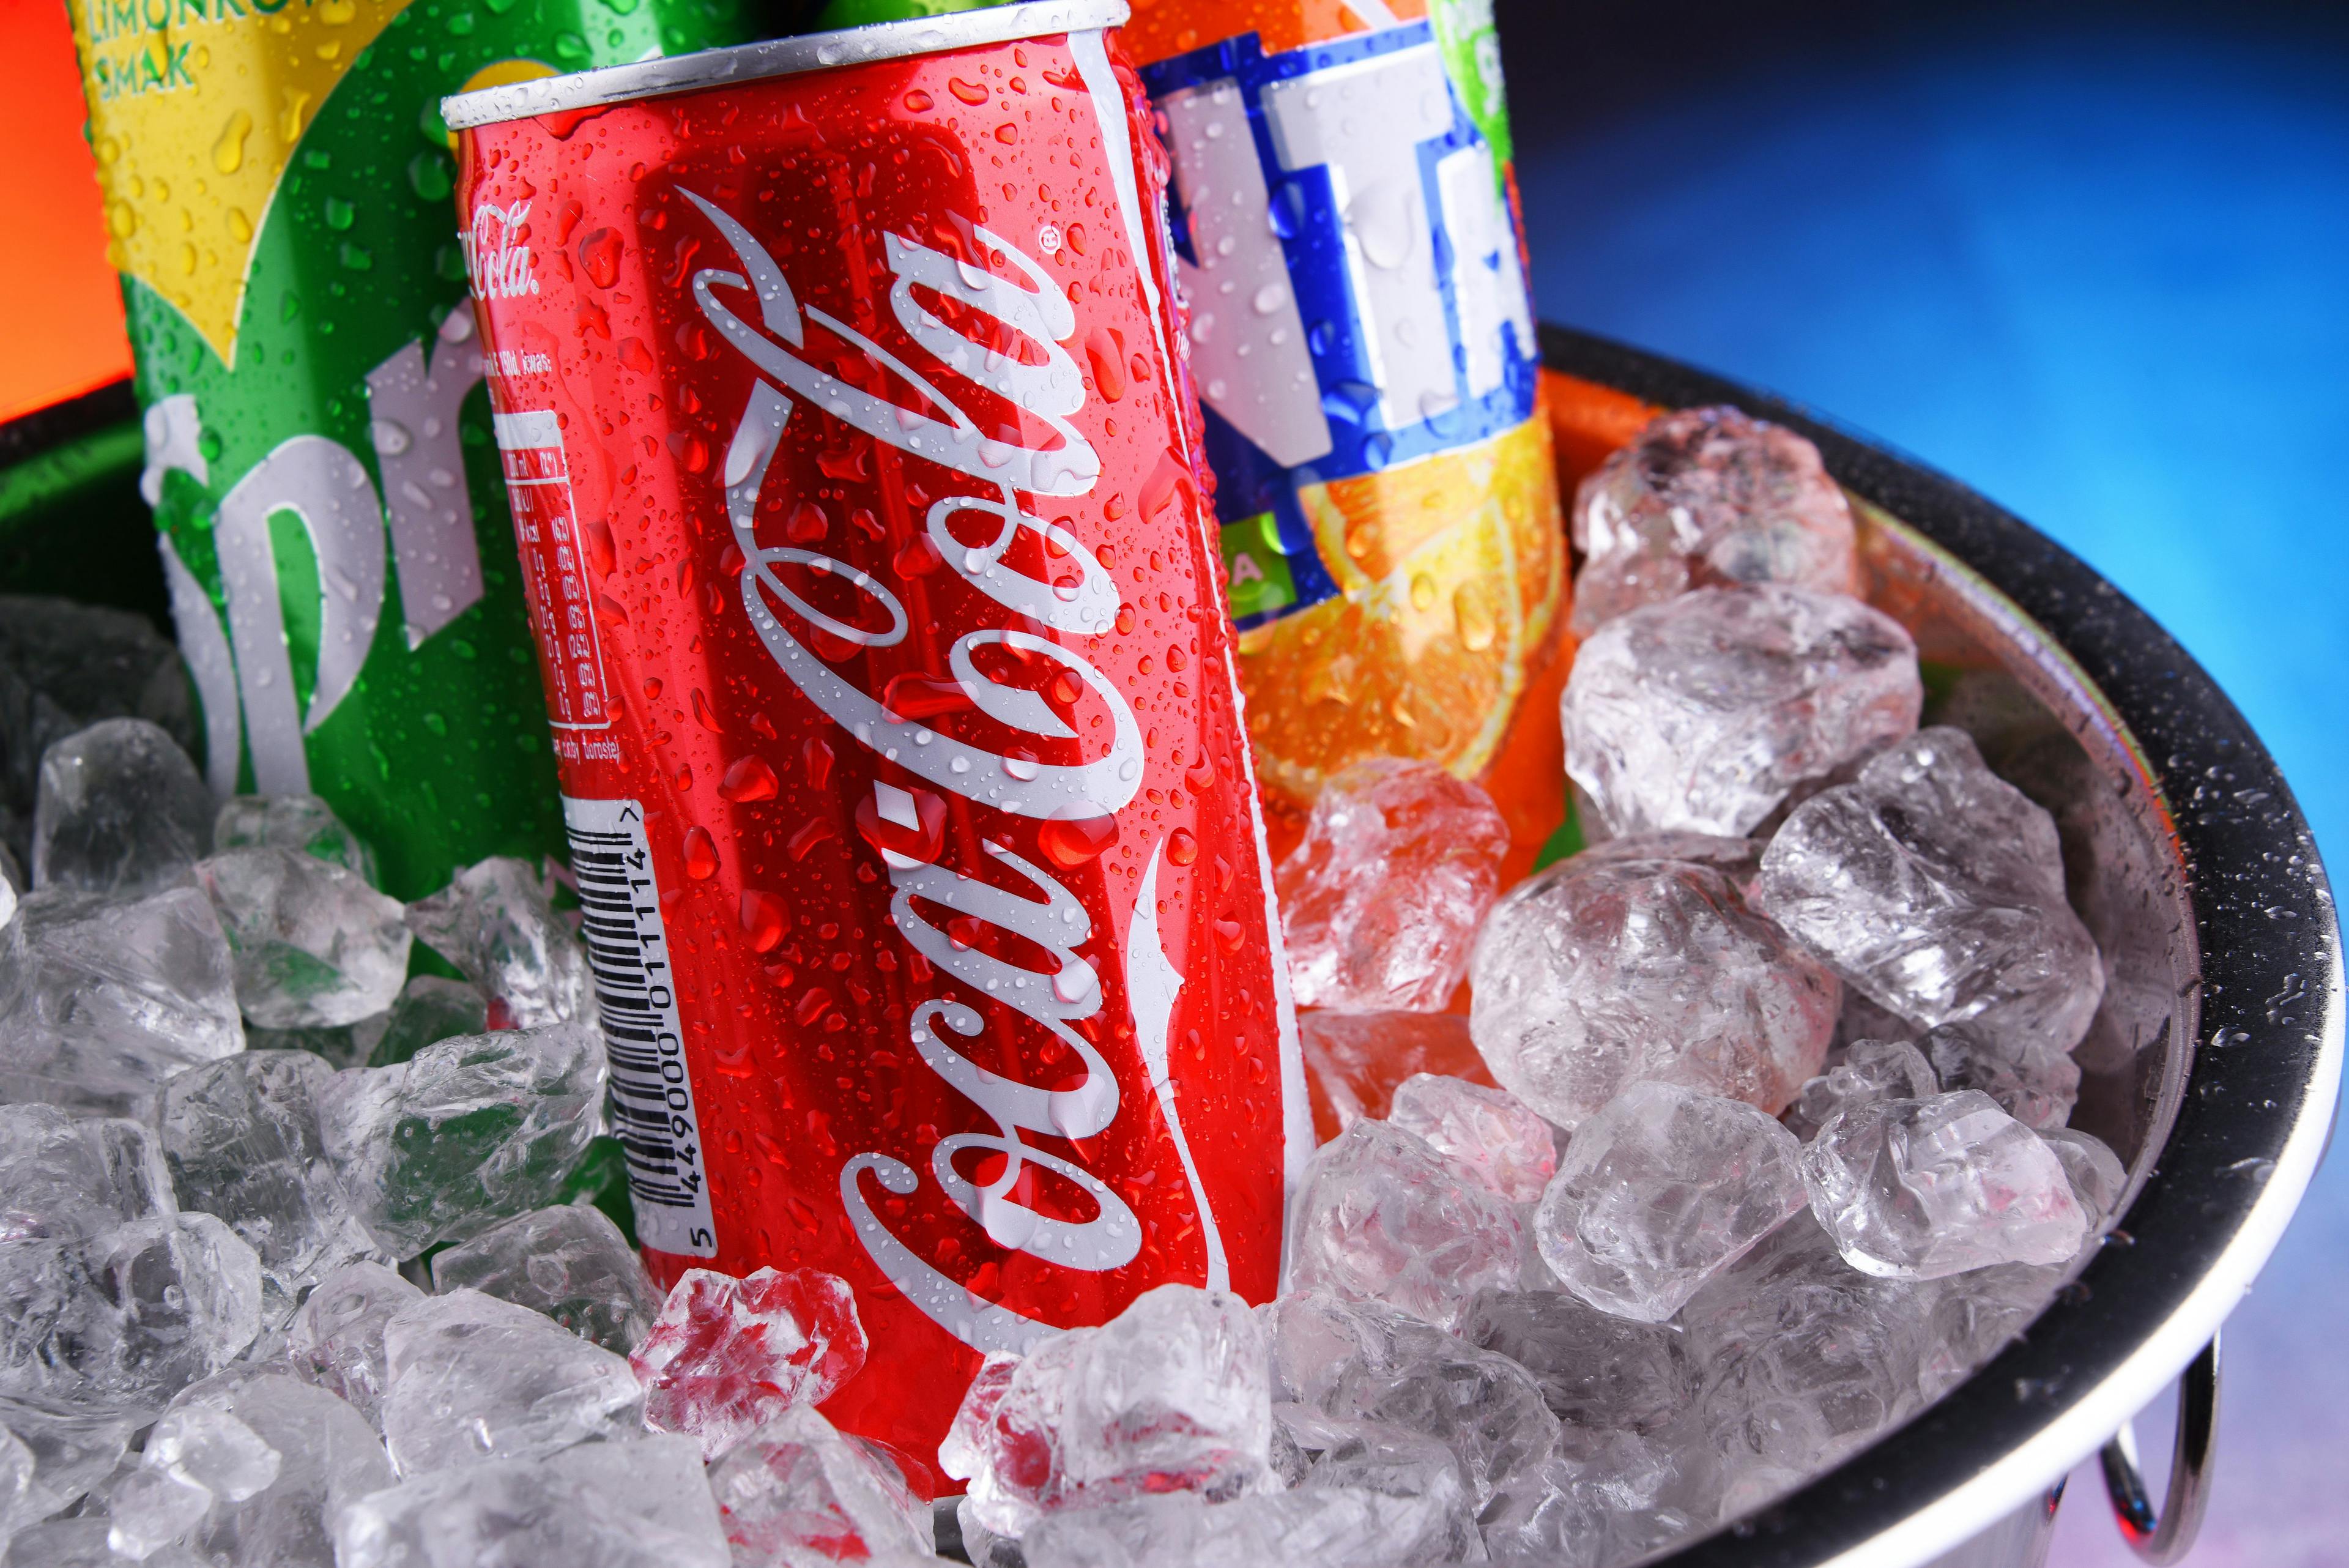 Cans of assorted Coca Cola Company soft drinks | Image Credit: © monticellllo - stock.adobe.com